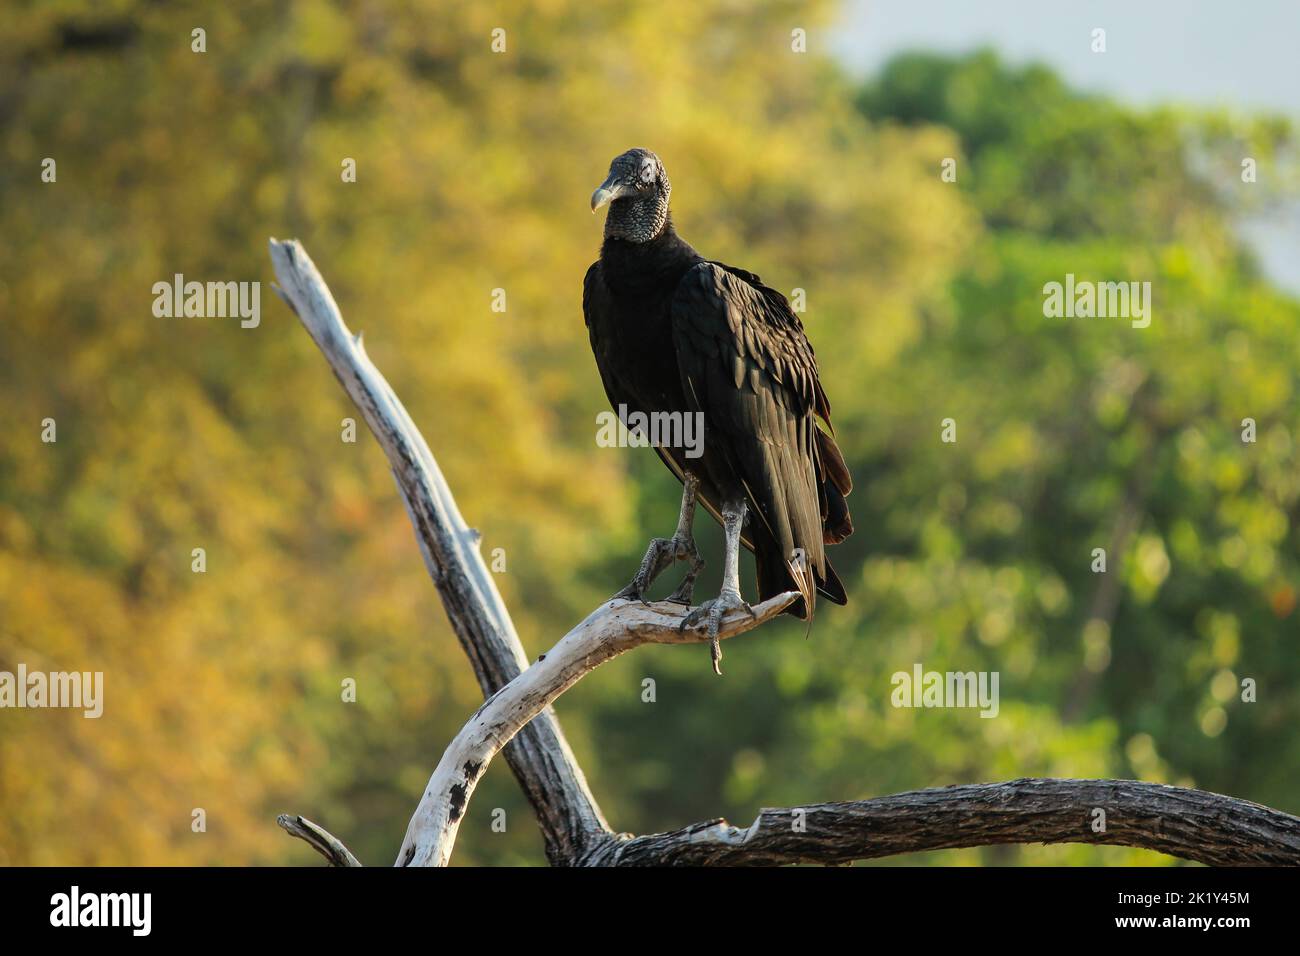 A black vulture perches on a dead tree on the beach in Guanacaste, Costa Rica. A vulture with a backdrop of golden trees. Stock Photo